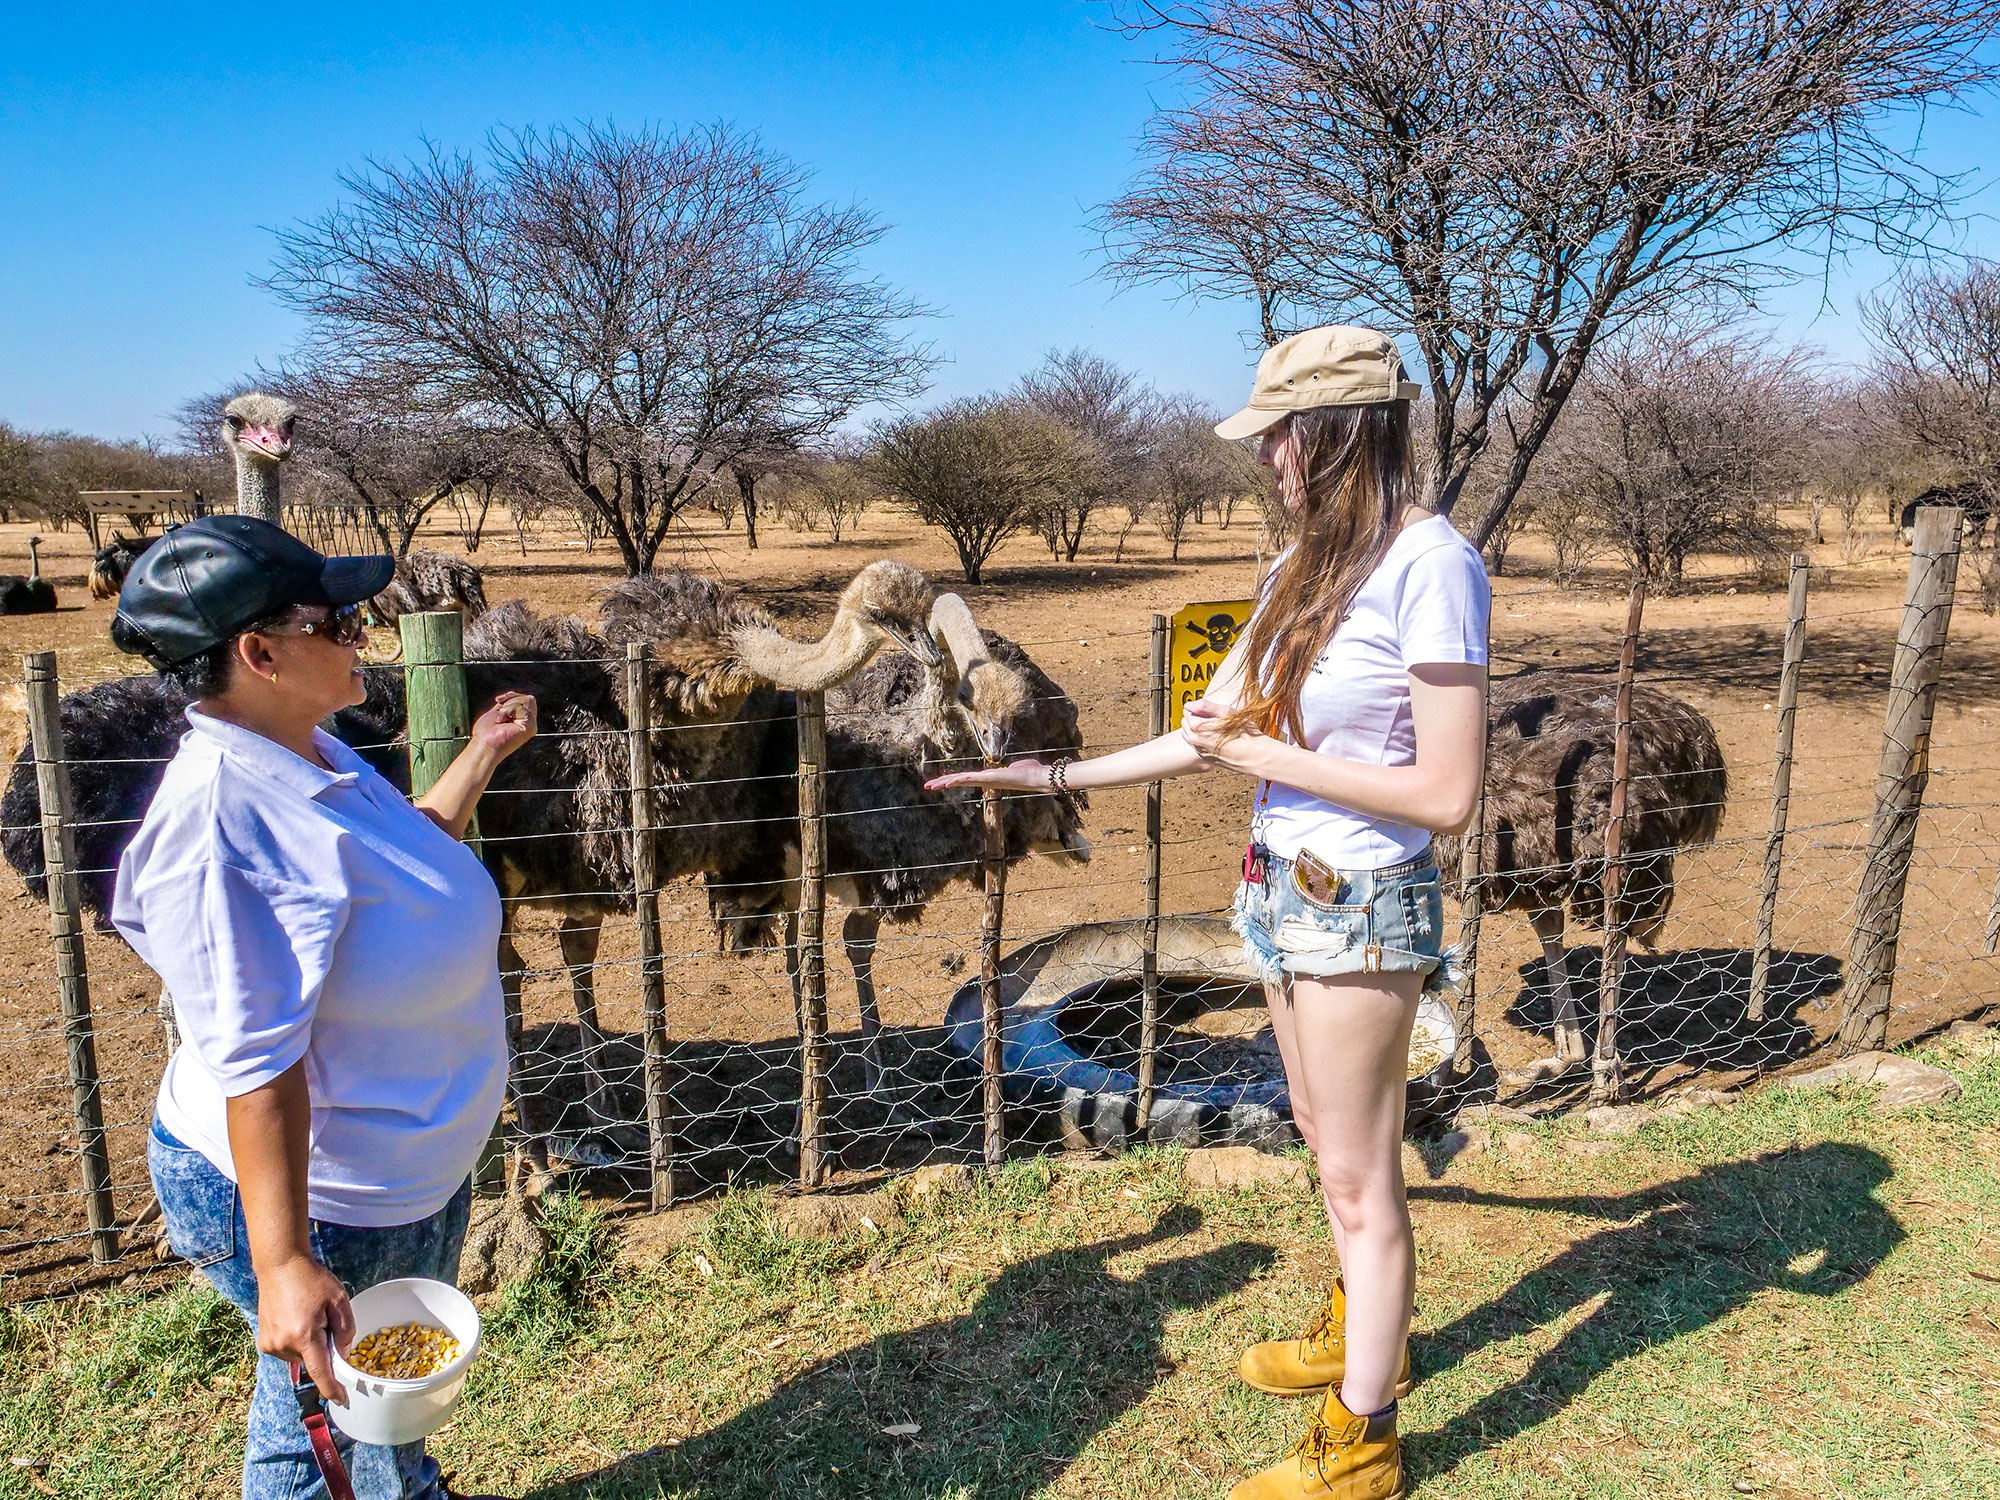 Ella feeding ostriches at Ombo Rest Camp in Namibia, Africa